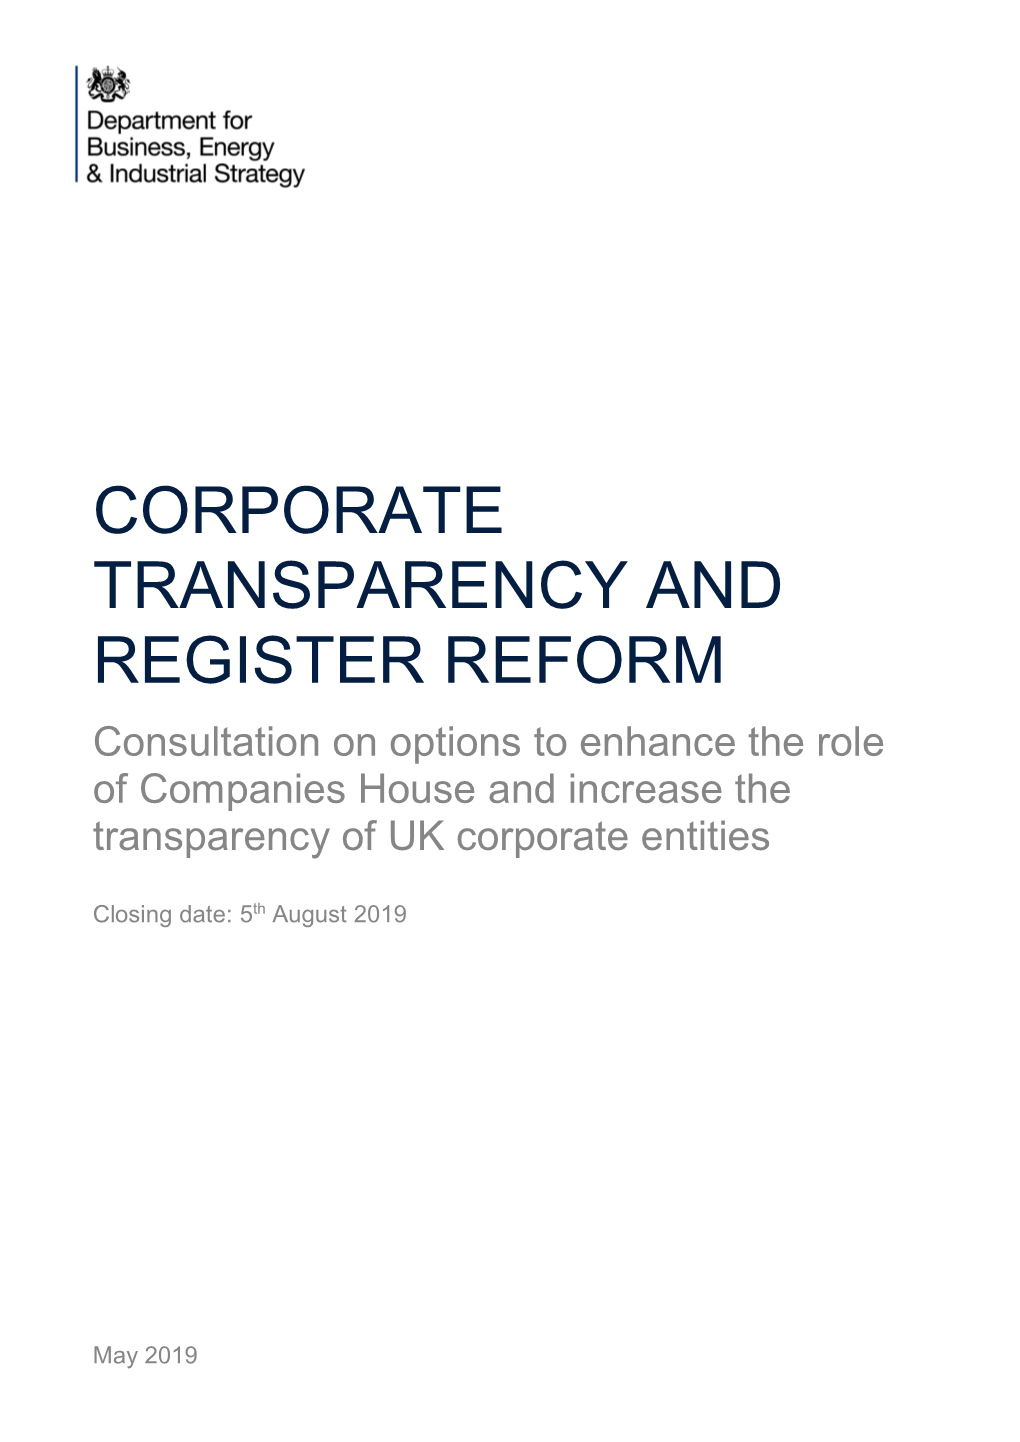 CORPORATE TRANSPARENCY and REGISTER REFORM Consultation on Options to Enhance the Role of Companies House and Increase the Transparency of UK Corporate Entities